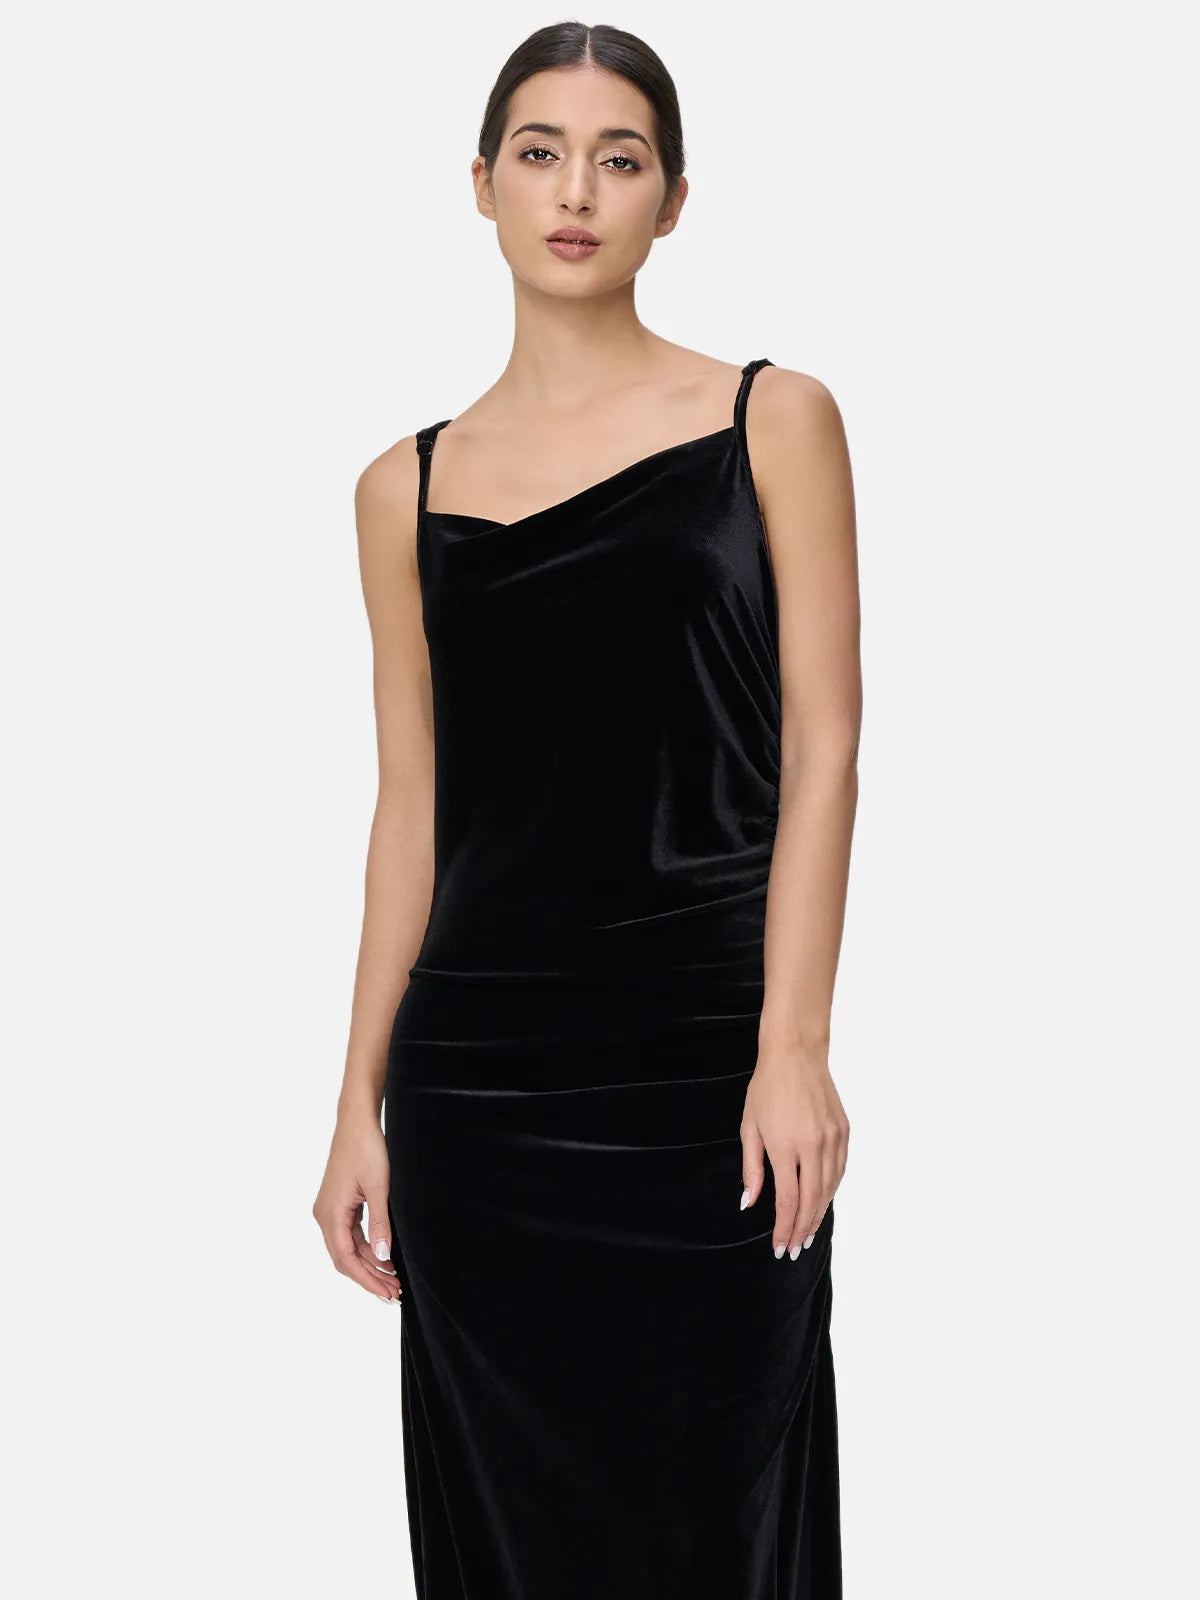 Comfortable wearing experience with a velvet spaghetti strap maxi dress featuring an irregular V-neck and pleated detailing